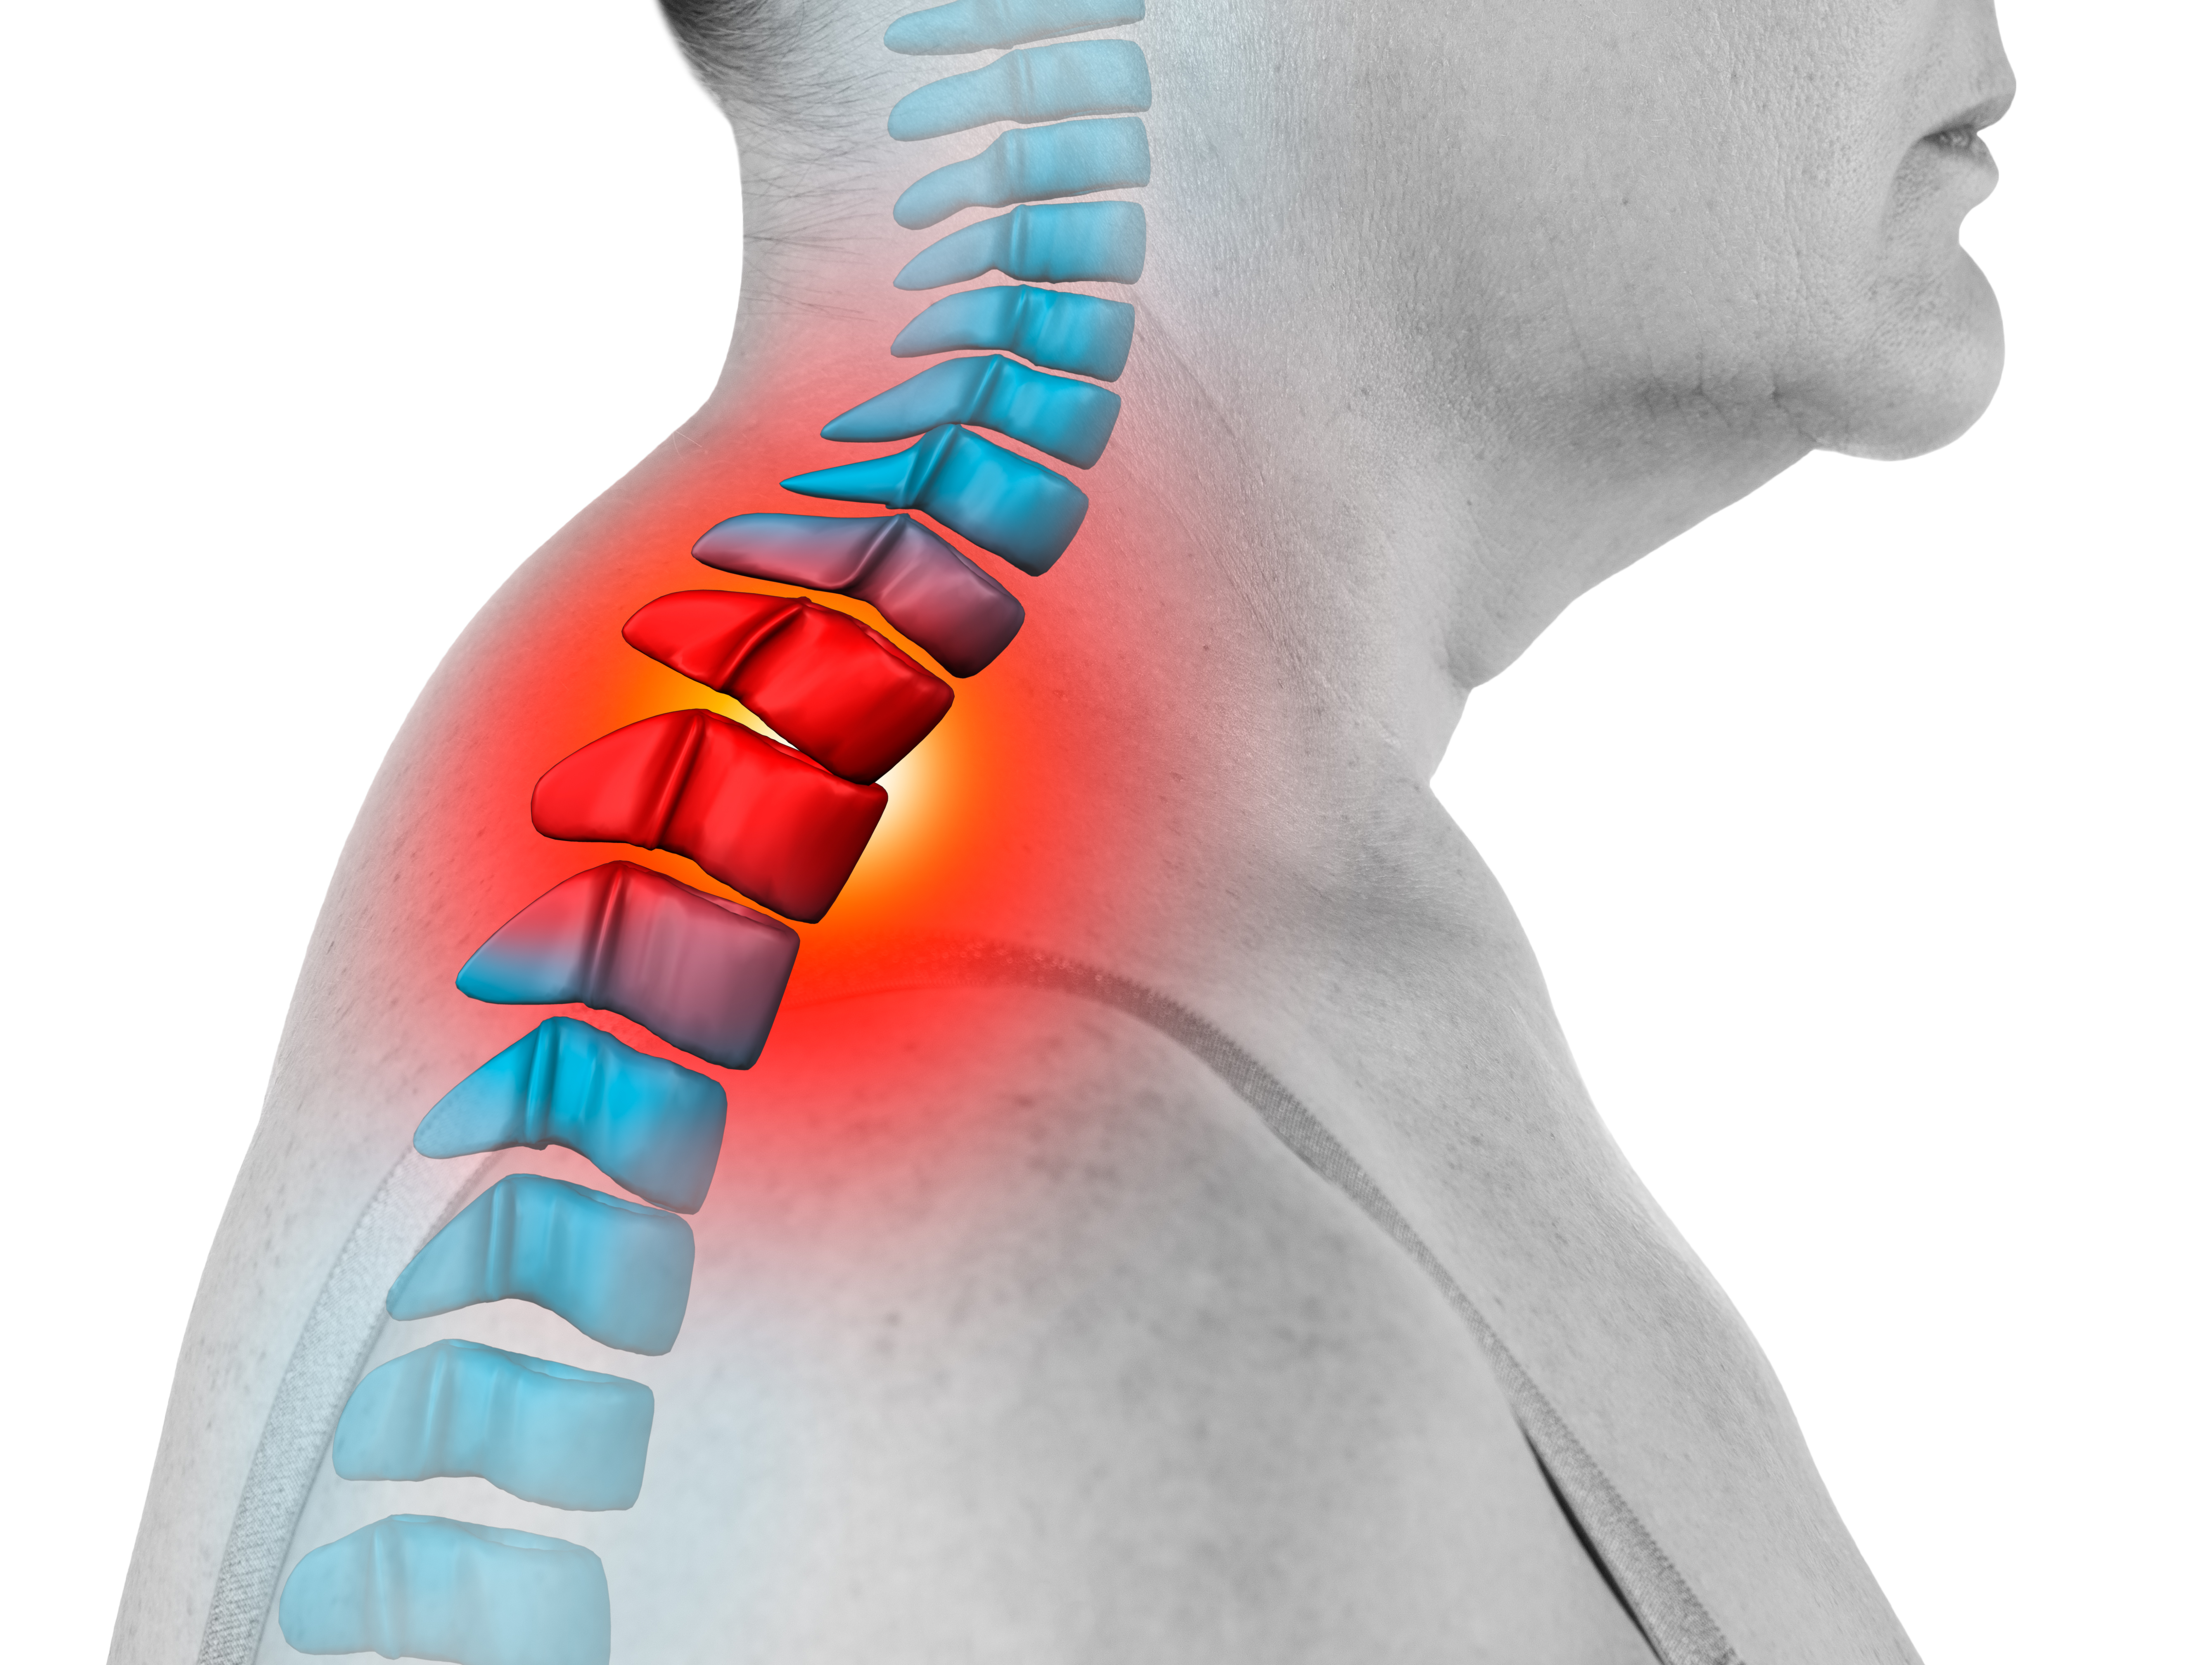 Charlestown Chiropractor - Hump at the base of your neck